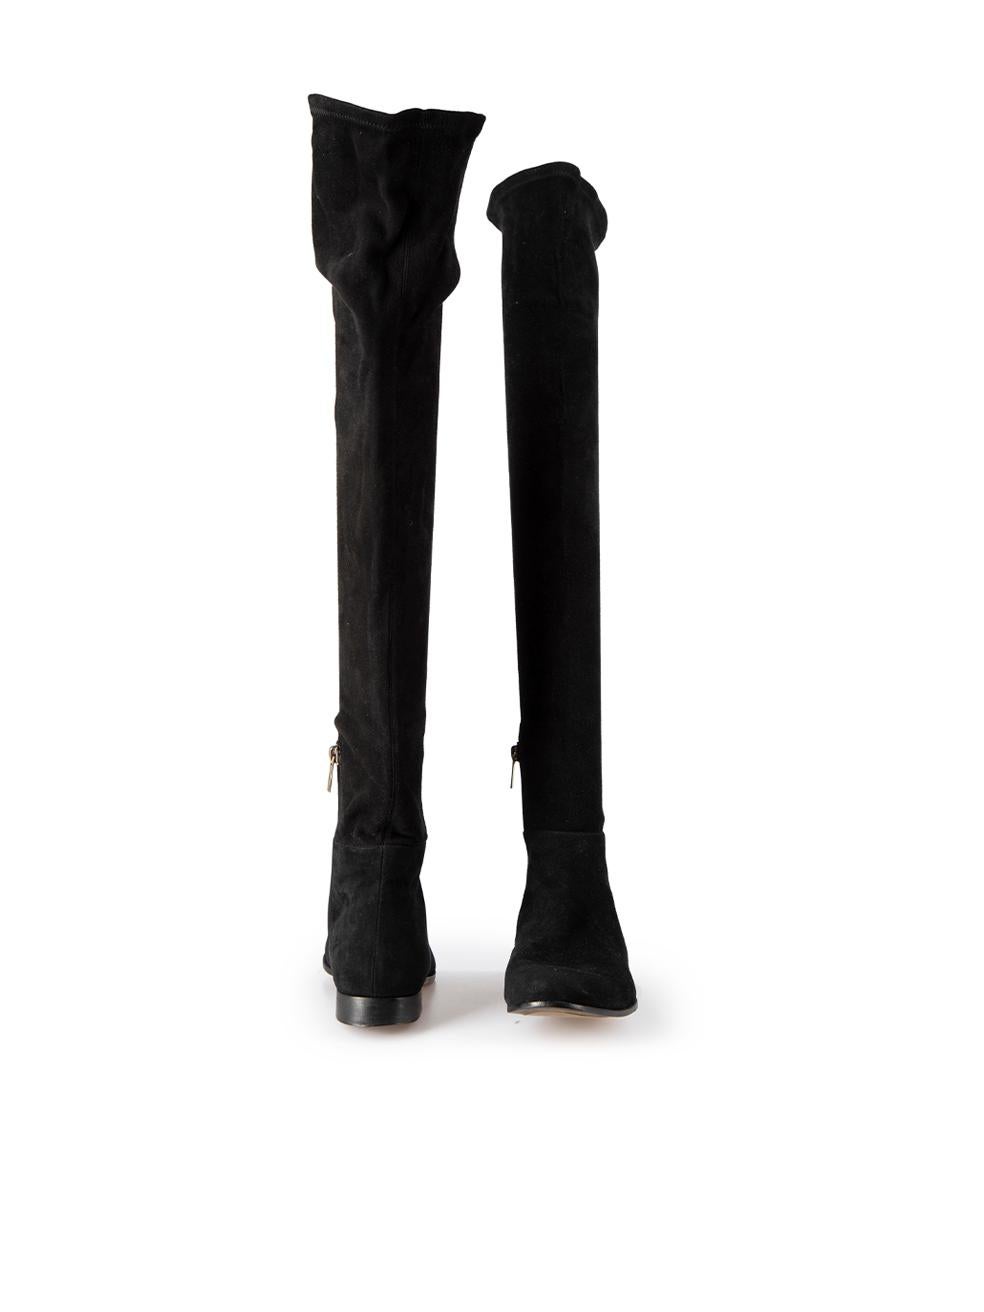 Black Suede Thigh High Boots Size IT 36.5 In Good Condition For Sale In London, GB